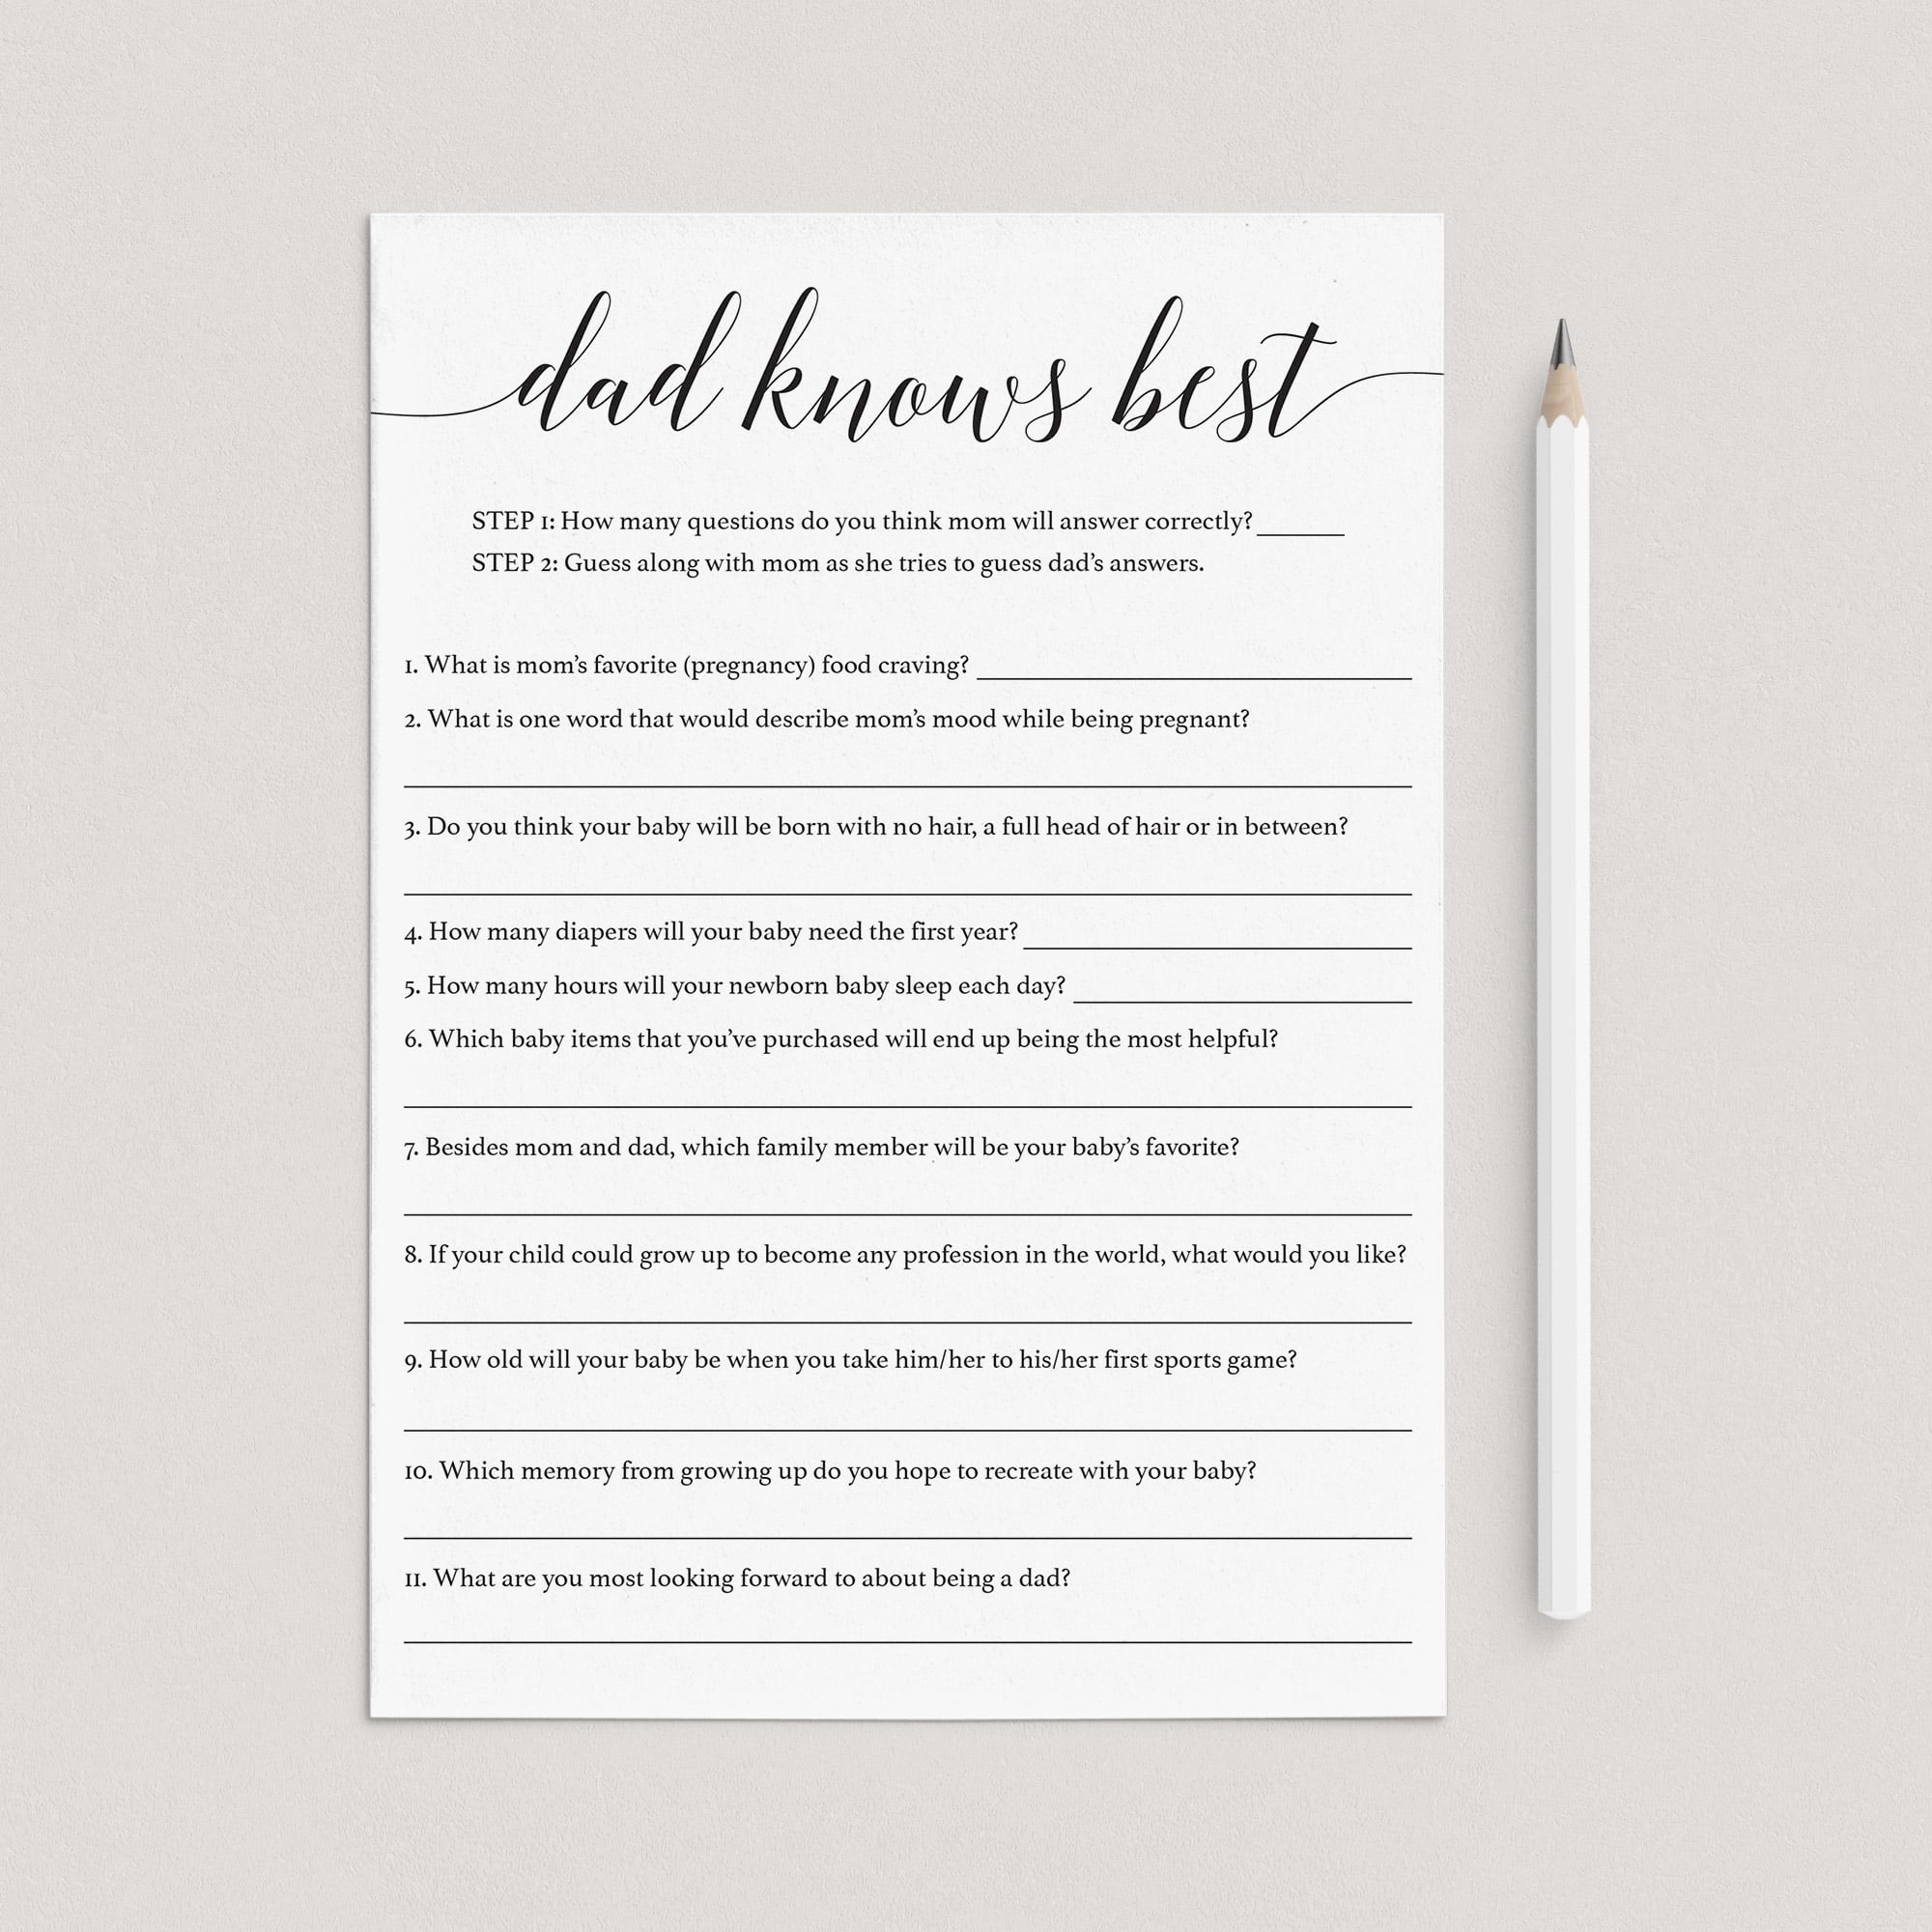 Dad knows best baby shower game template by LittleSizzle